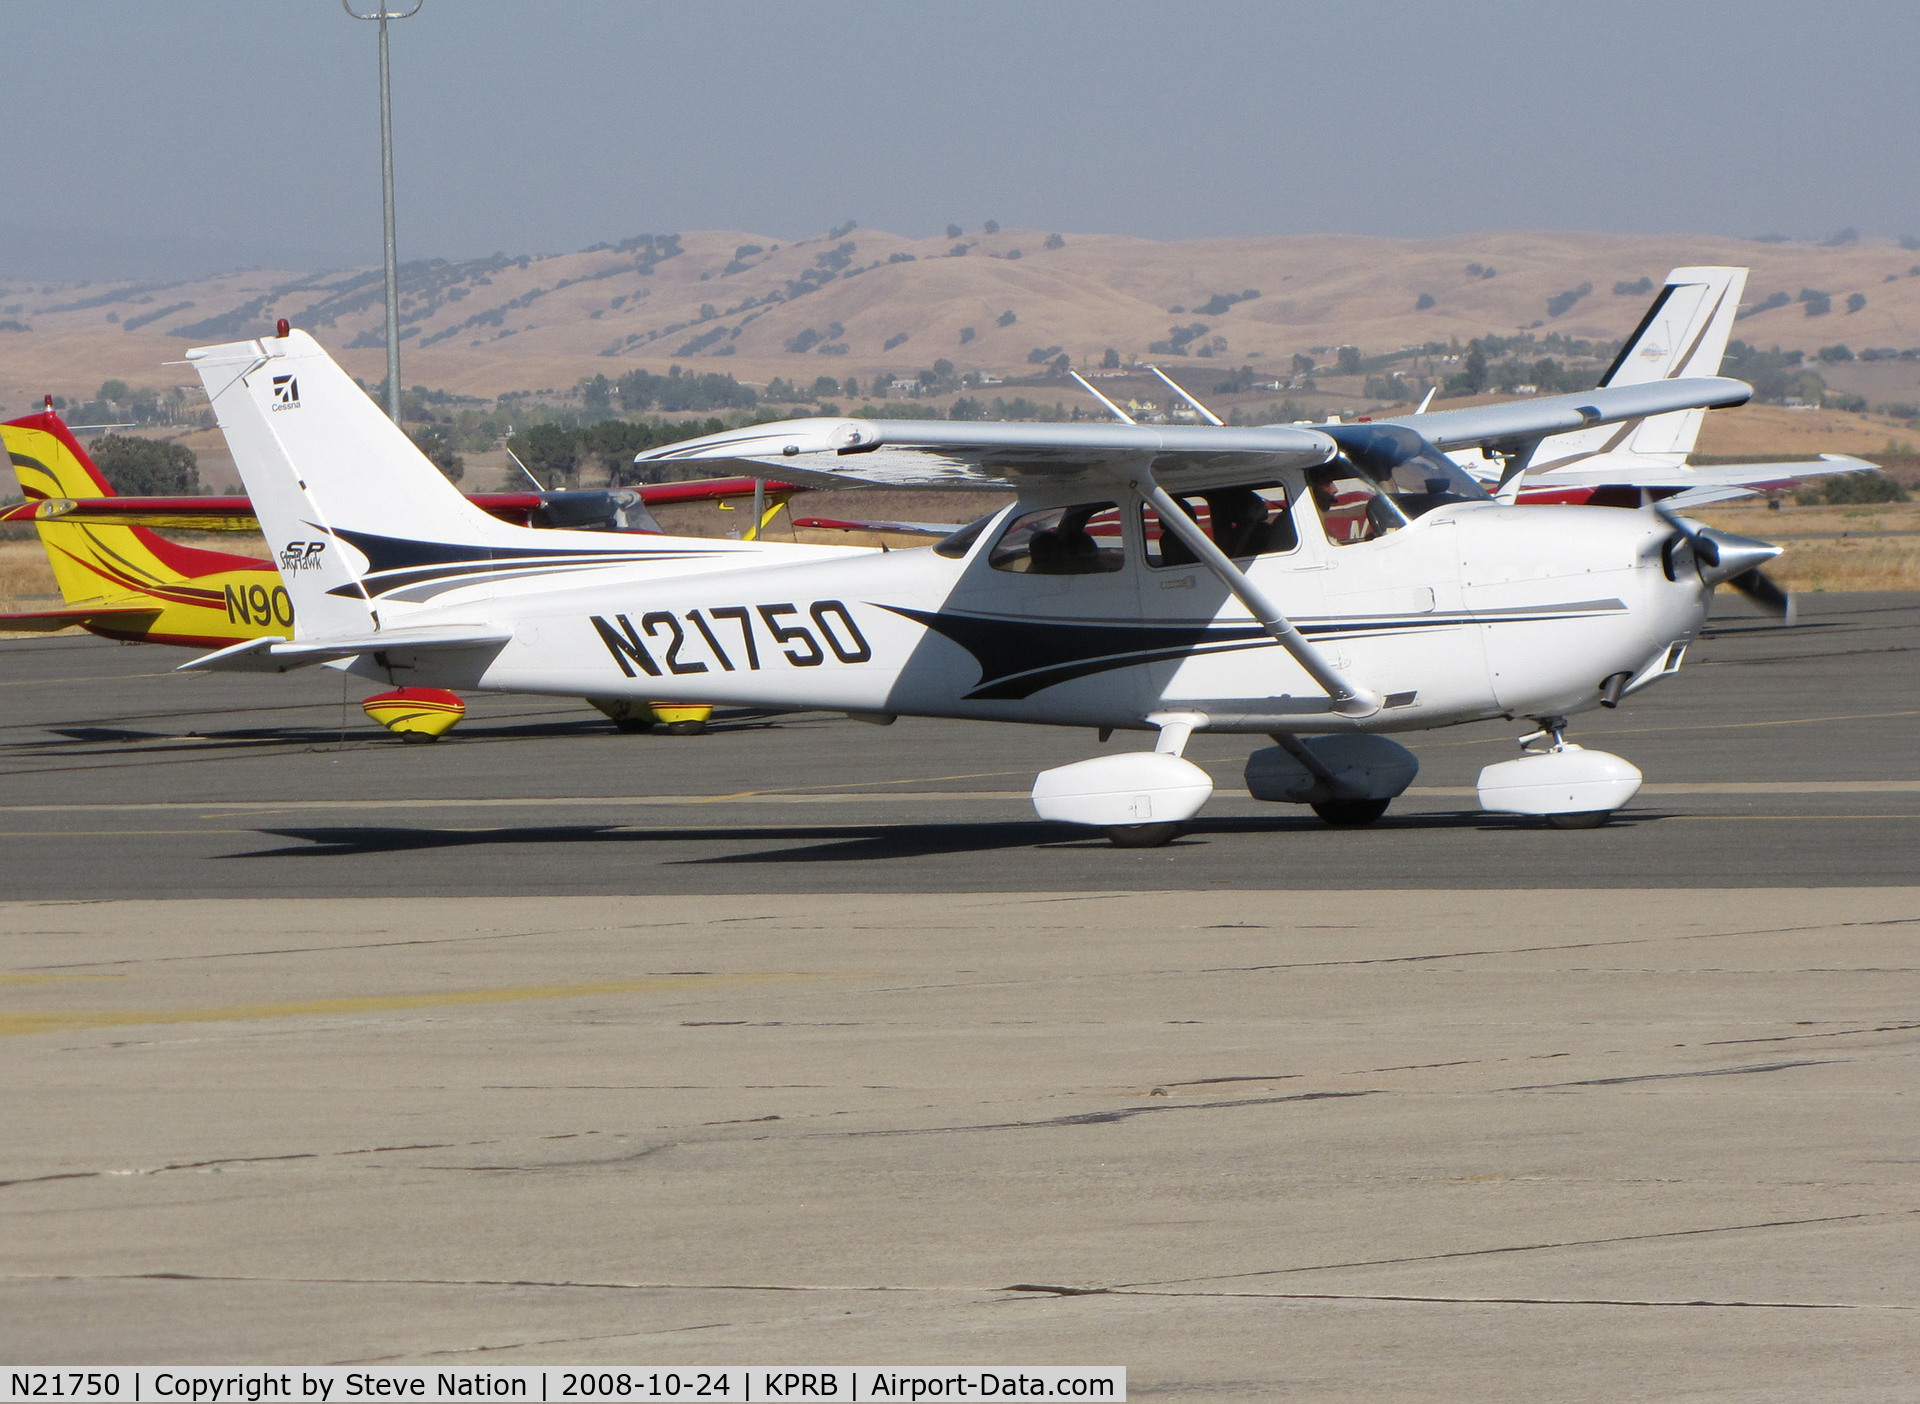 N21750, 2004 Cessna 172S C/N 172S9641, 2004 Cessna 172S from Camarillo Municipal Airport, CA starting engine on transient ramp @ Paso Robles Municipal Airport, CA